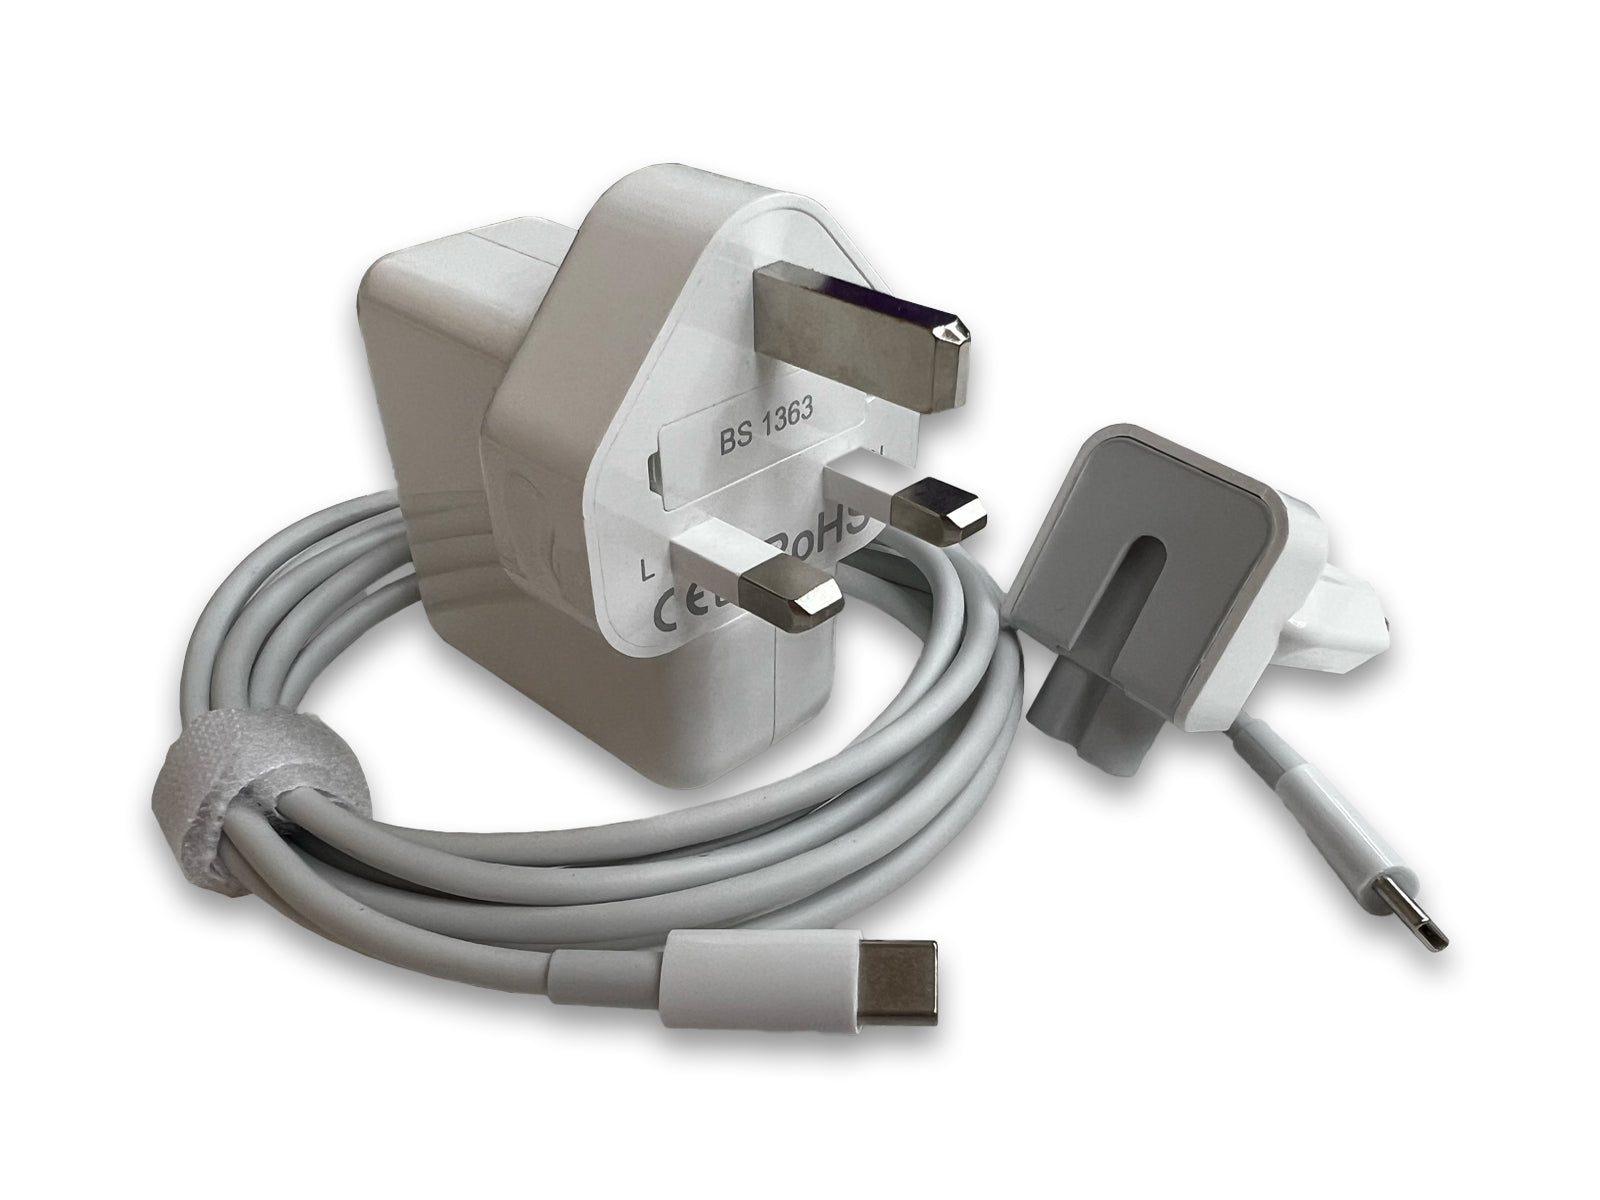 MacBook Air Charger Front View